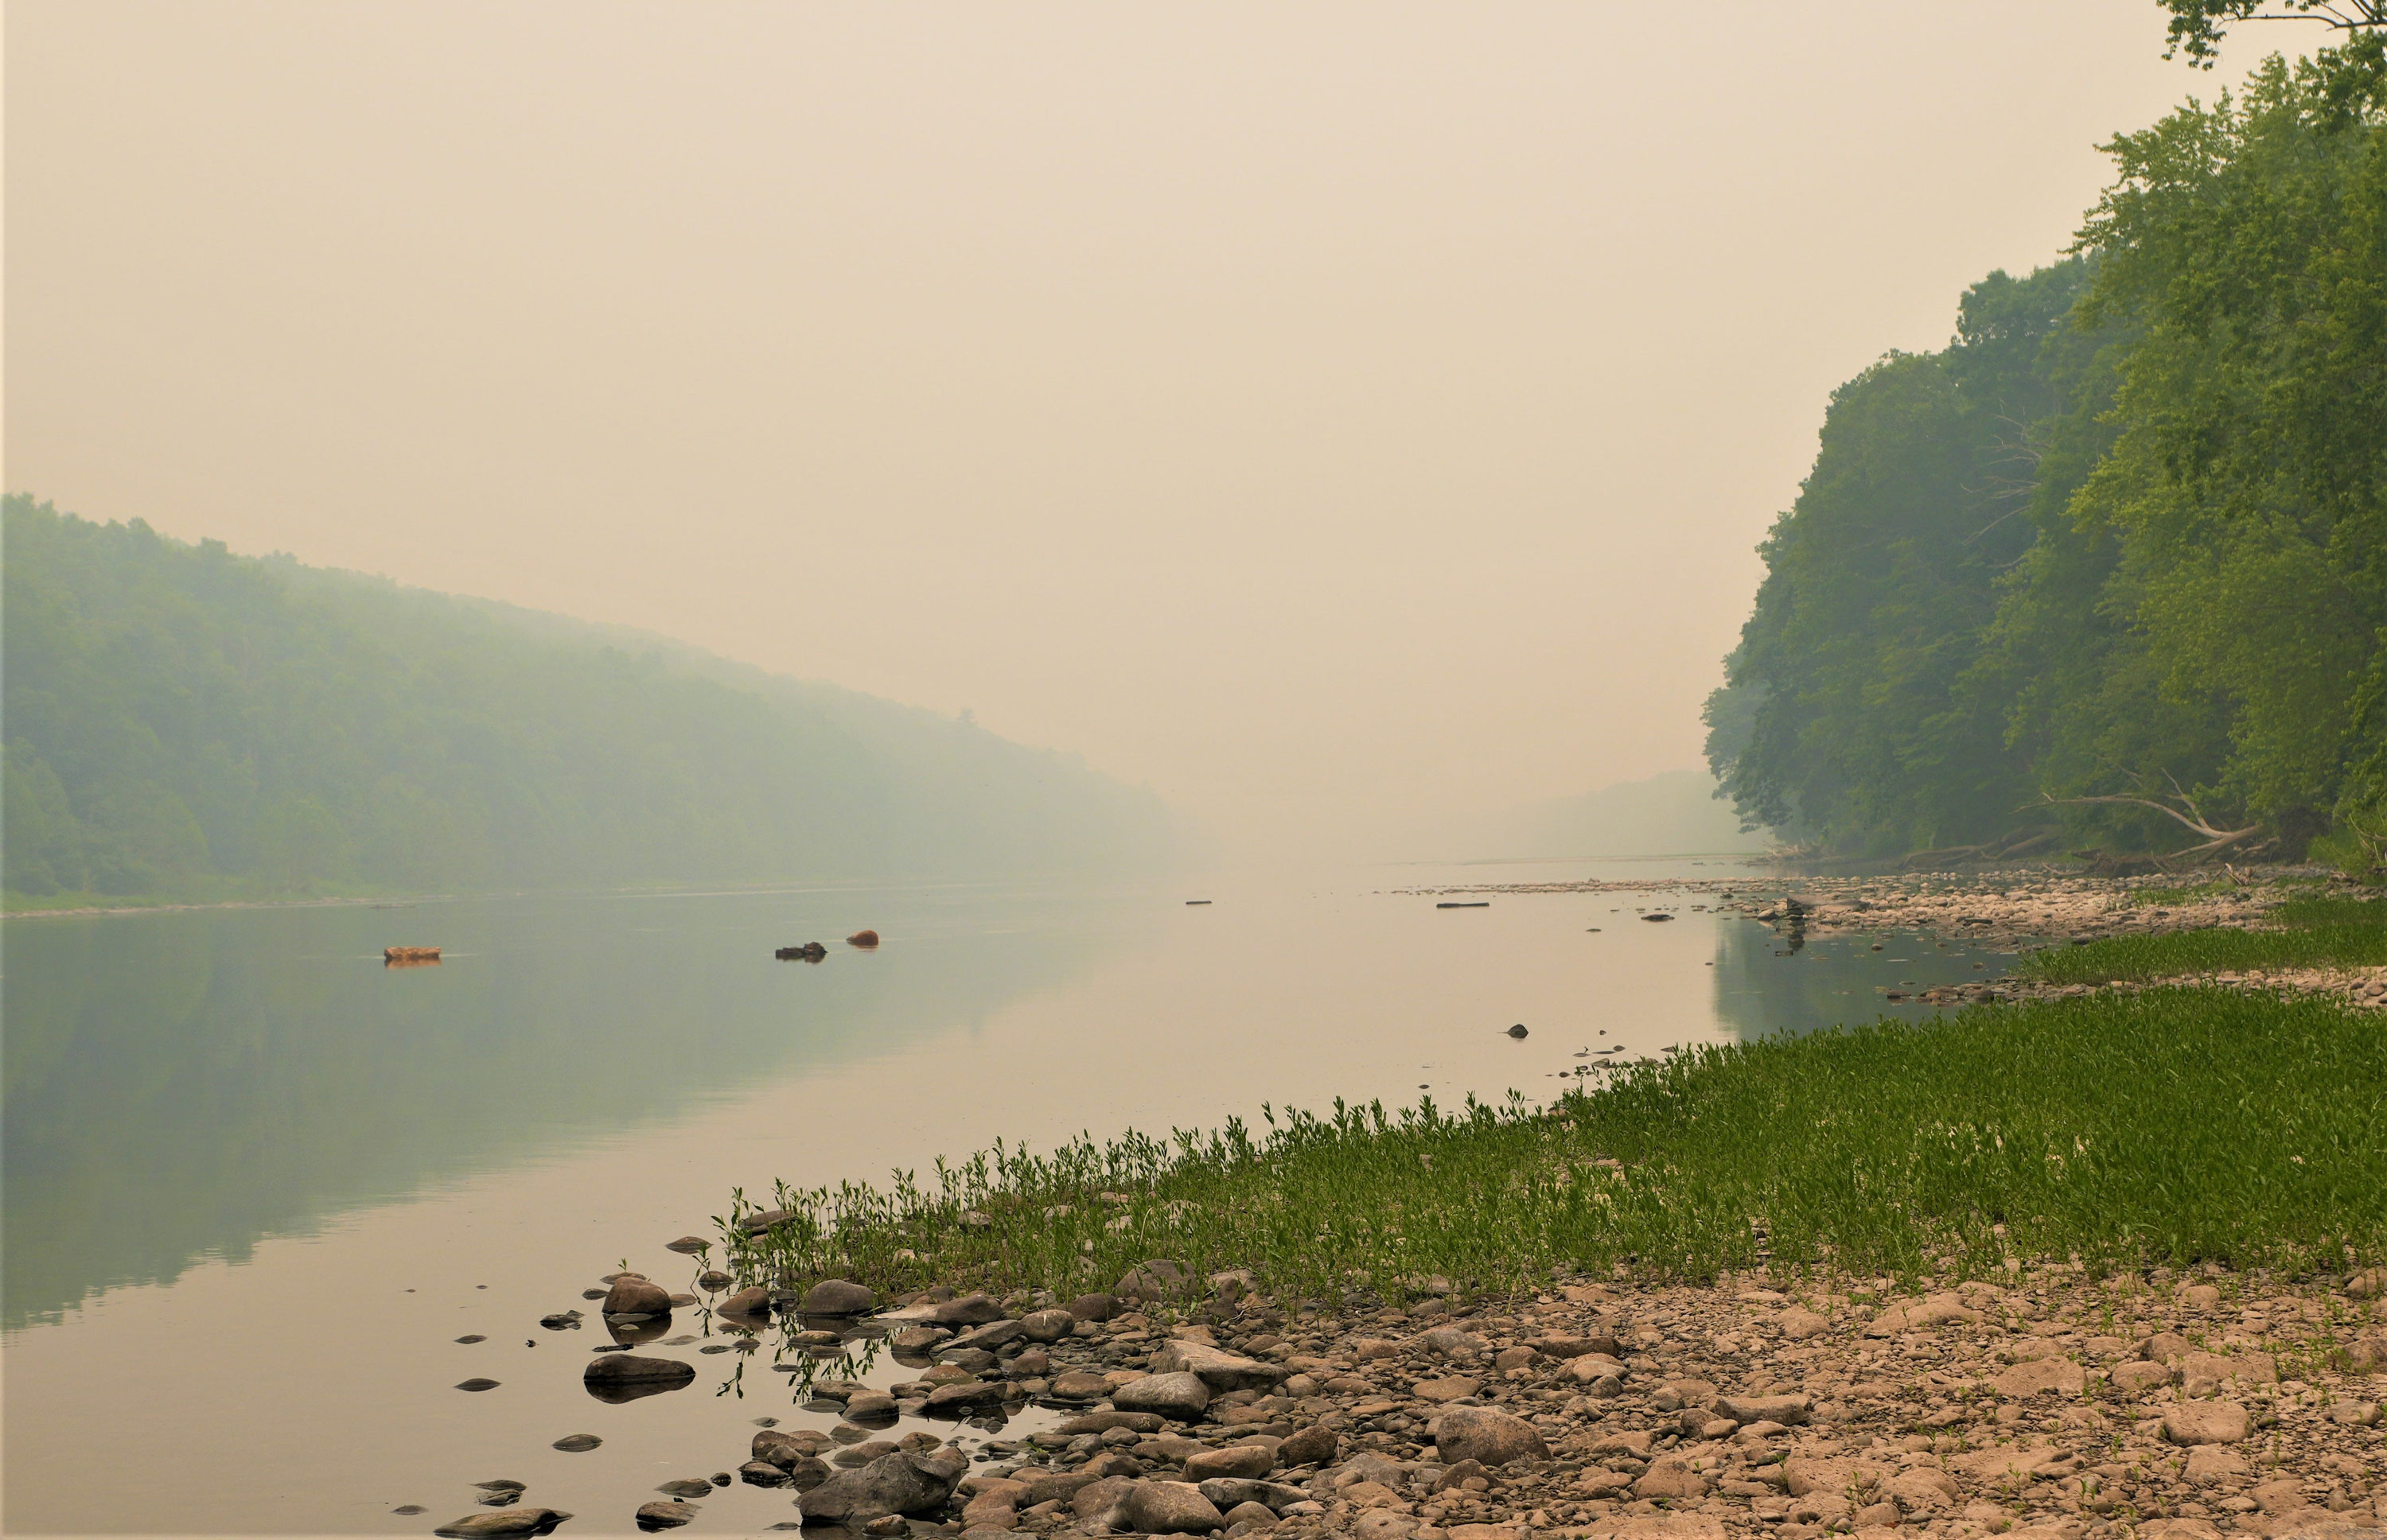 This is not a foggy morning on the Delaware River, but the smoke from Canadian wildfires which has blanketed the eastern U.S. This part of the river is just south of the Dingman's Bridge shot from the Pennsylvania shore.